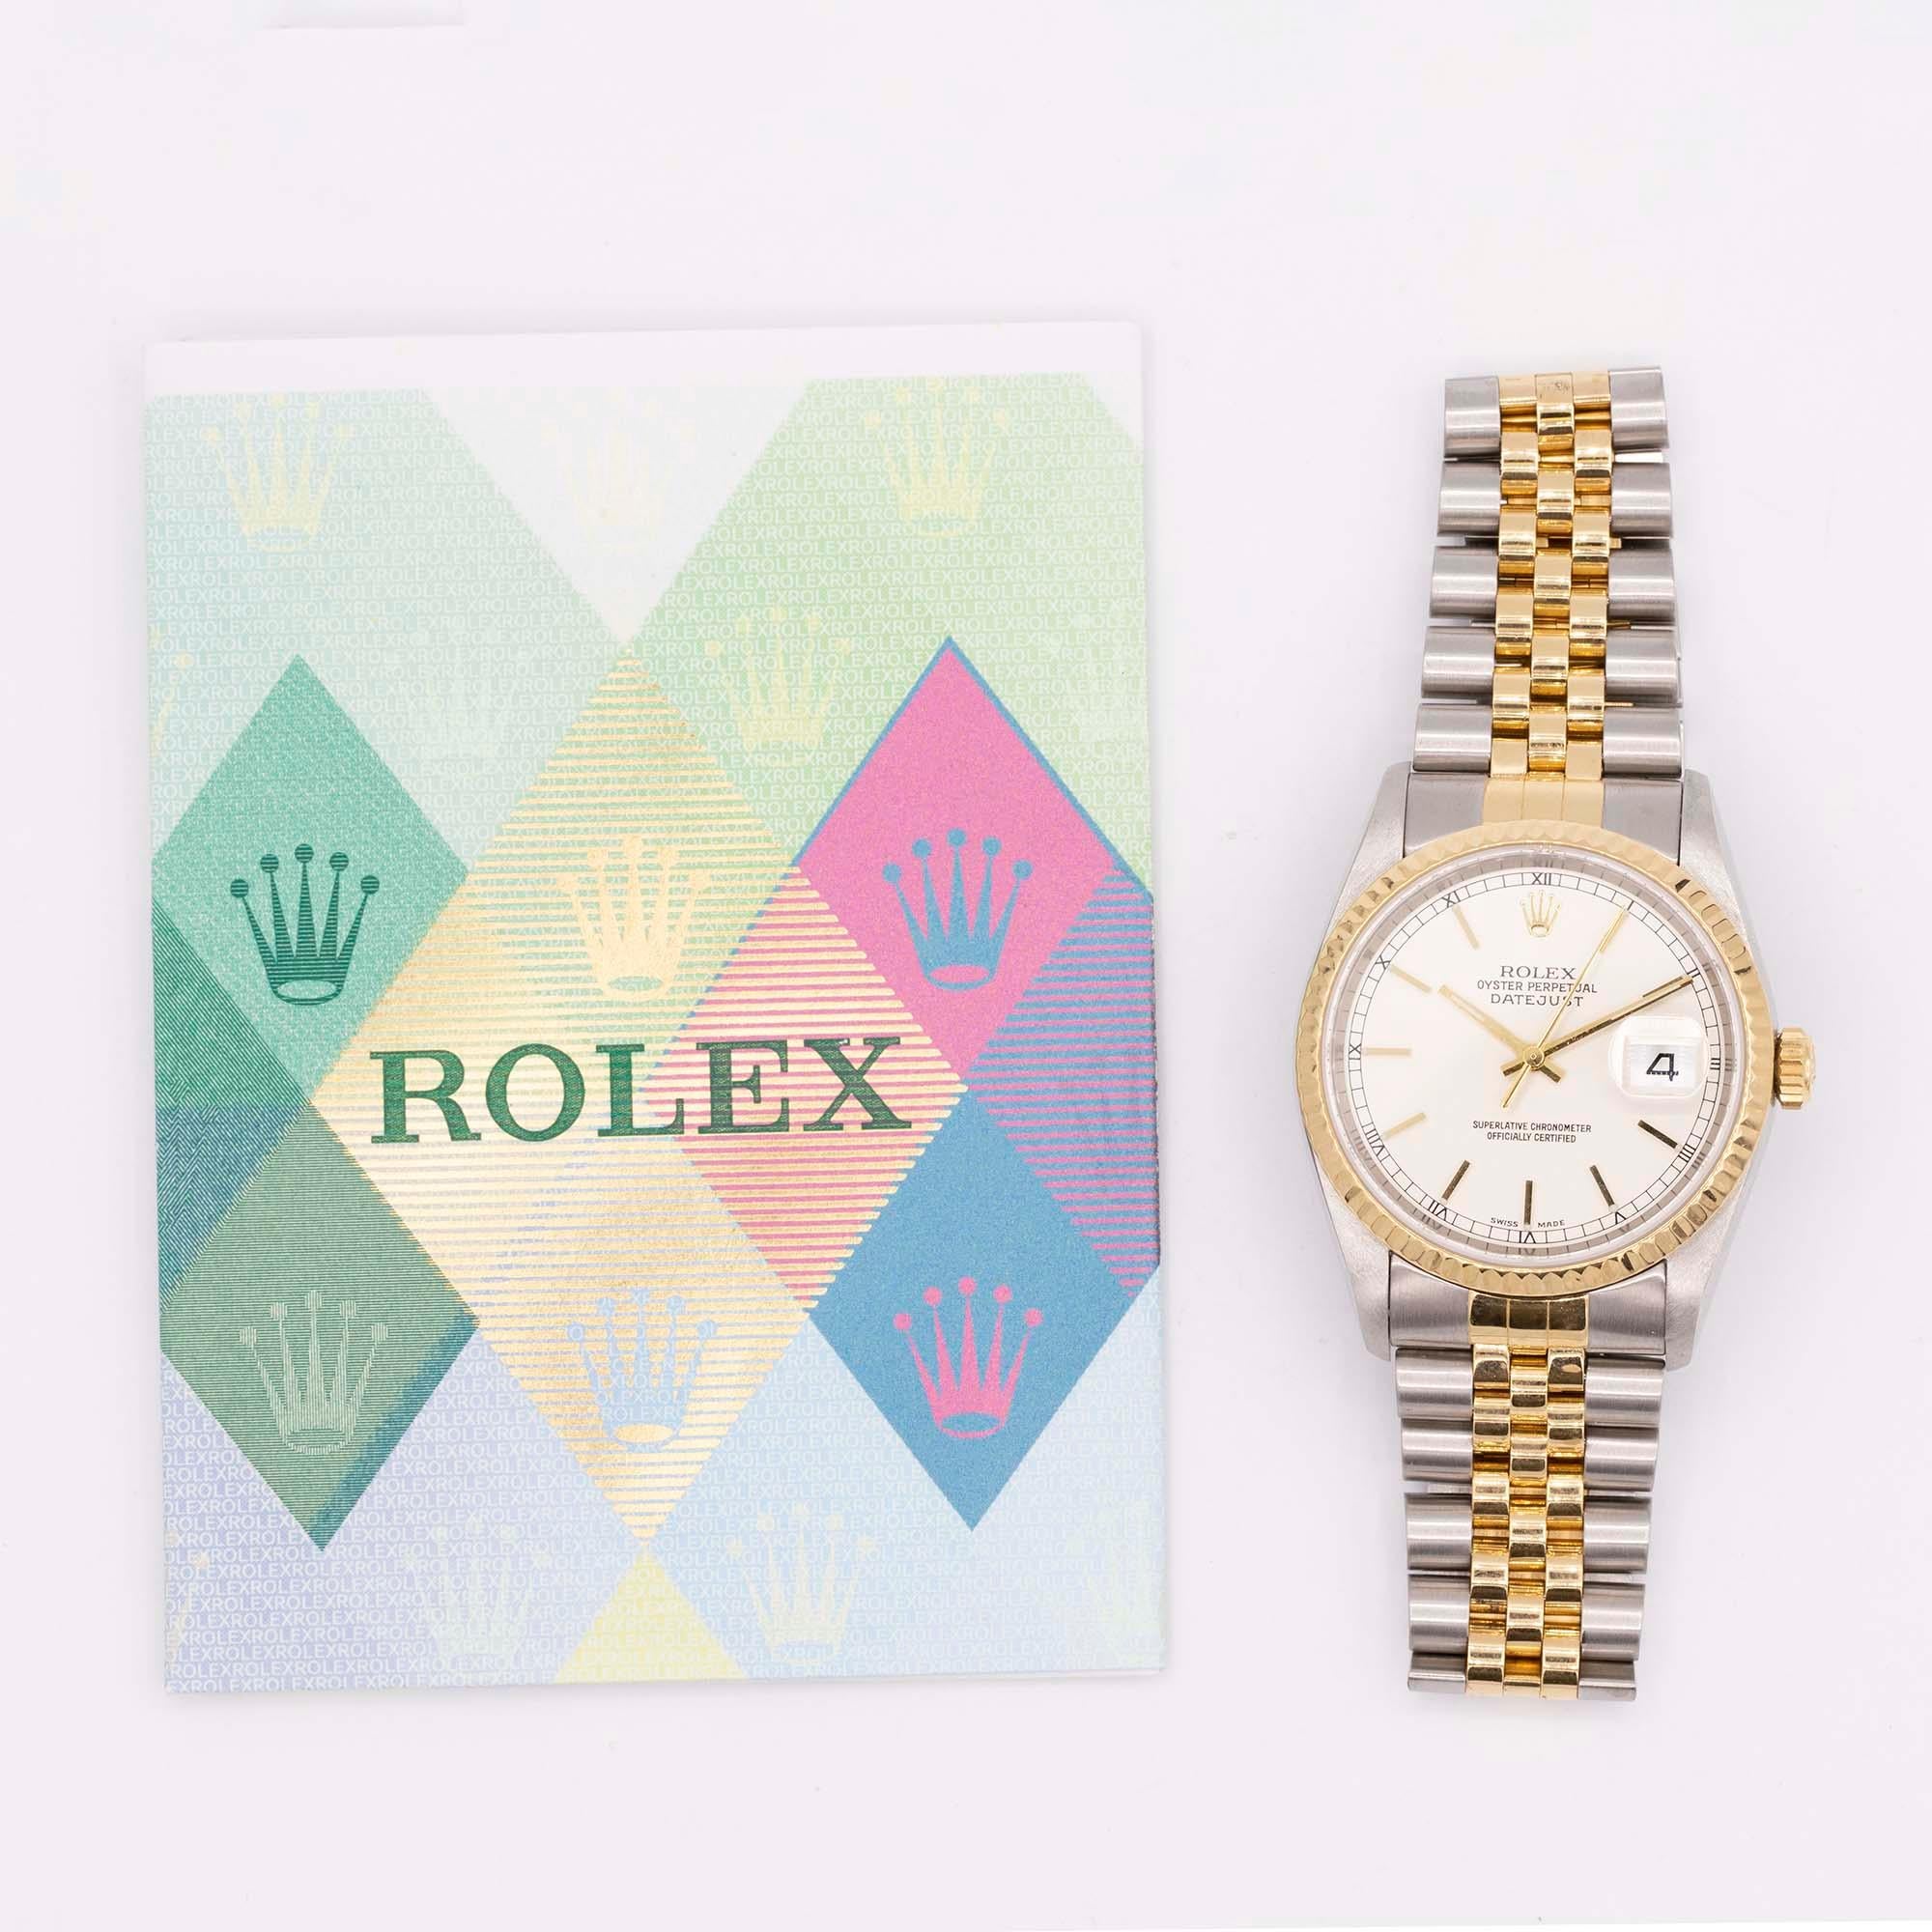 Vintage Stainless Steel & 18 karat yellow gold Rolex Datejust. Size 36mm. This Rolex has a silver dial and a fluted yellow gold bezel. This Rolex is housed on a Jubilee bracelet. The reference # is 16233 and the serial starts with a Y. Comes with